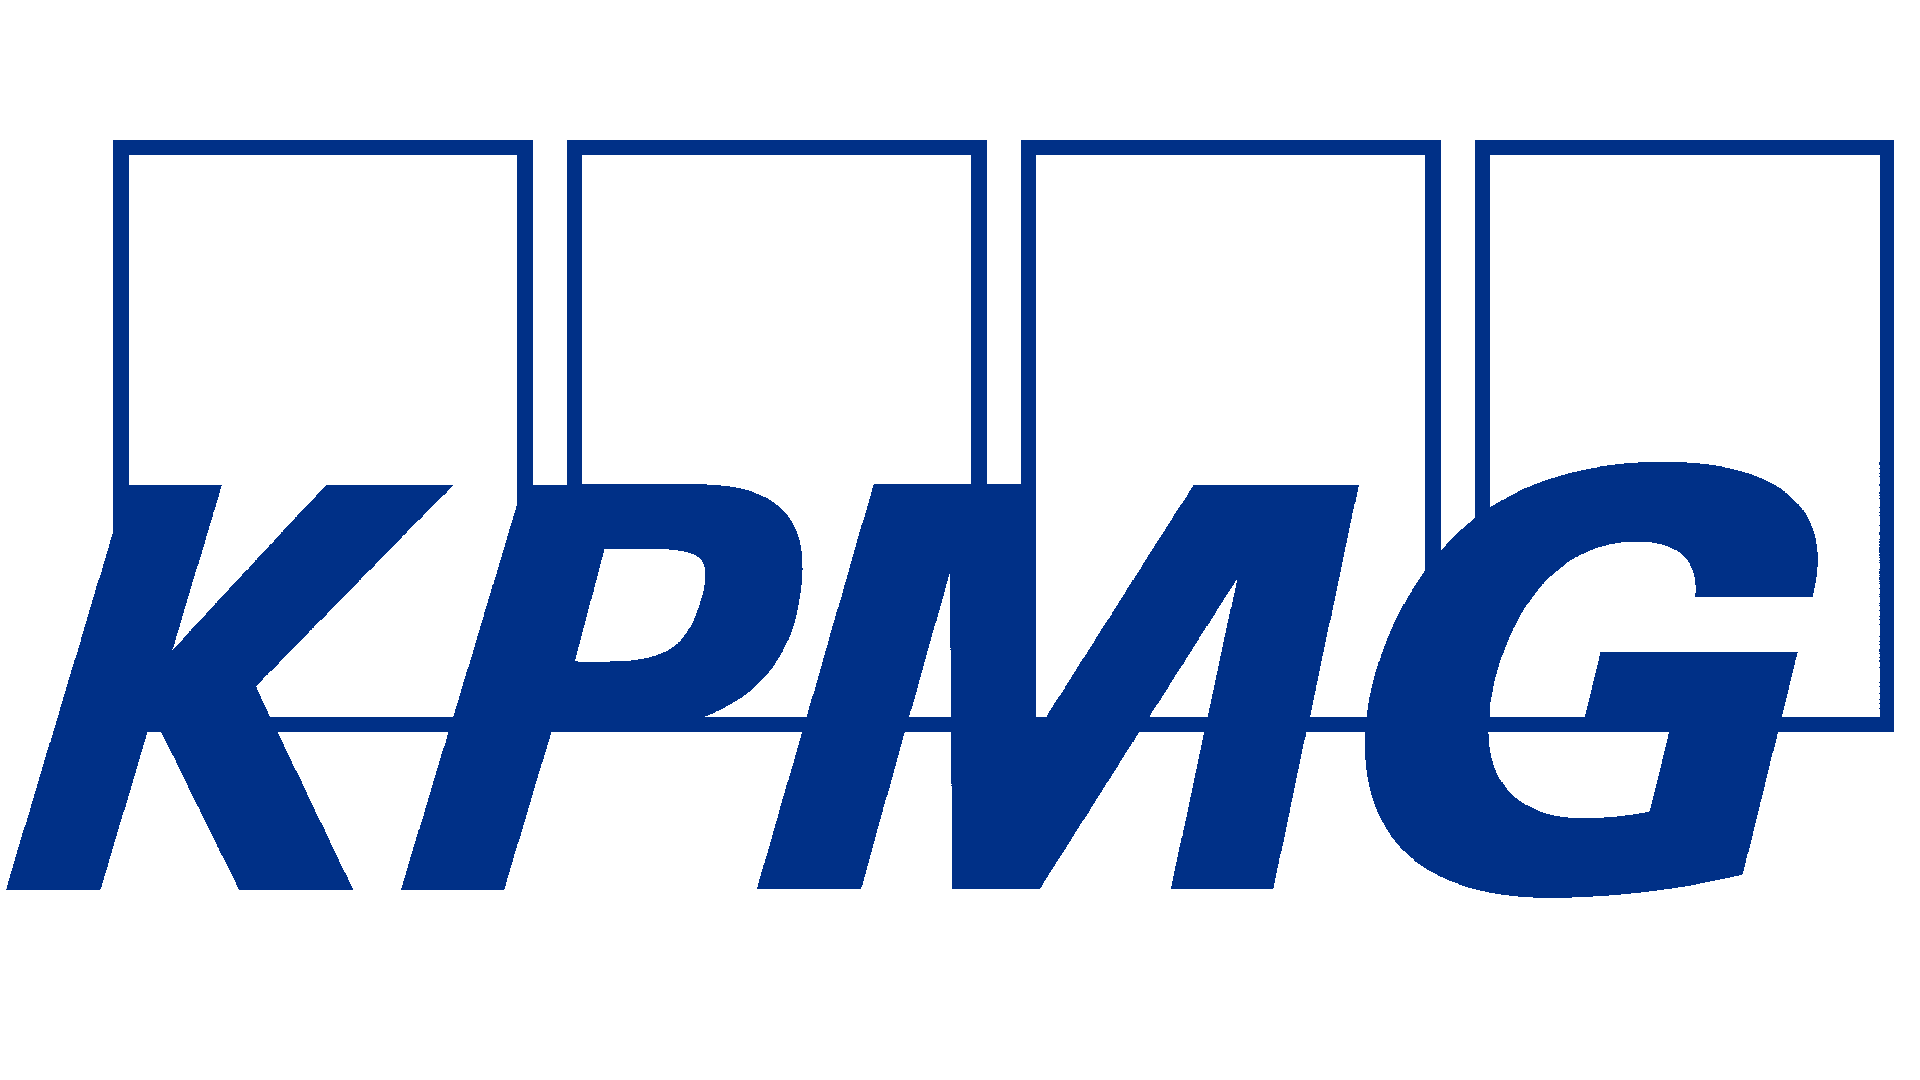 KPMG logo and symbol, meaning, history, PNG